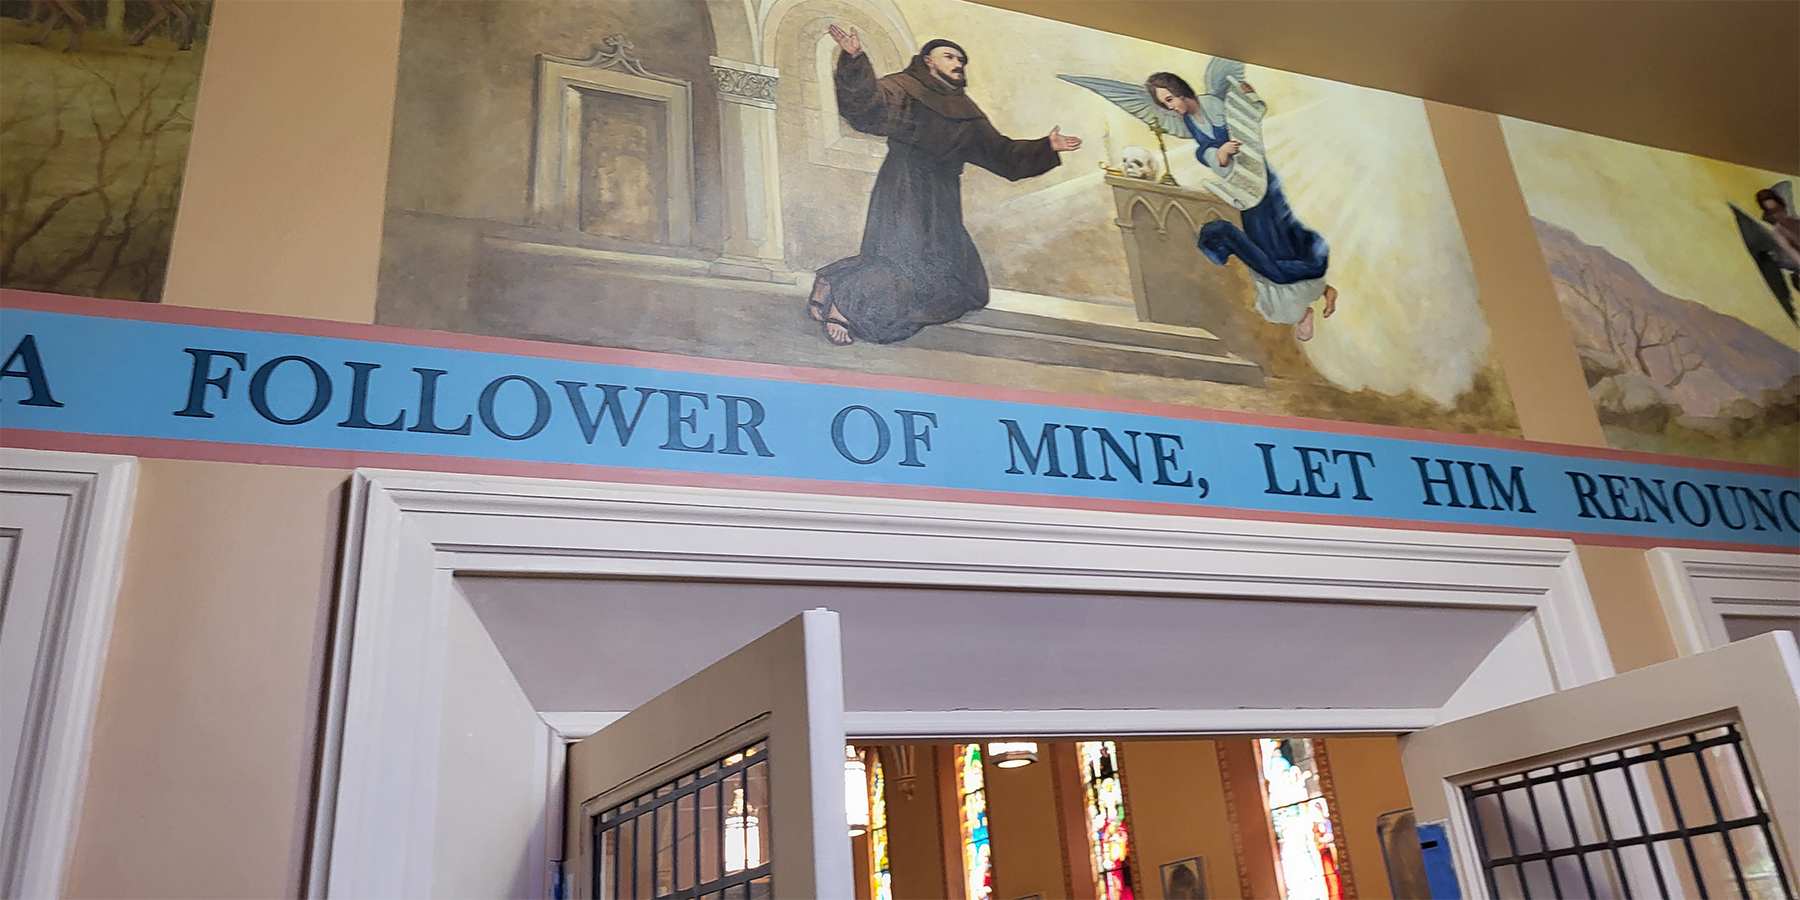 Mural of the life of St. Francis